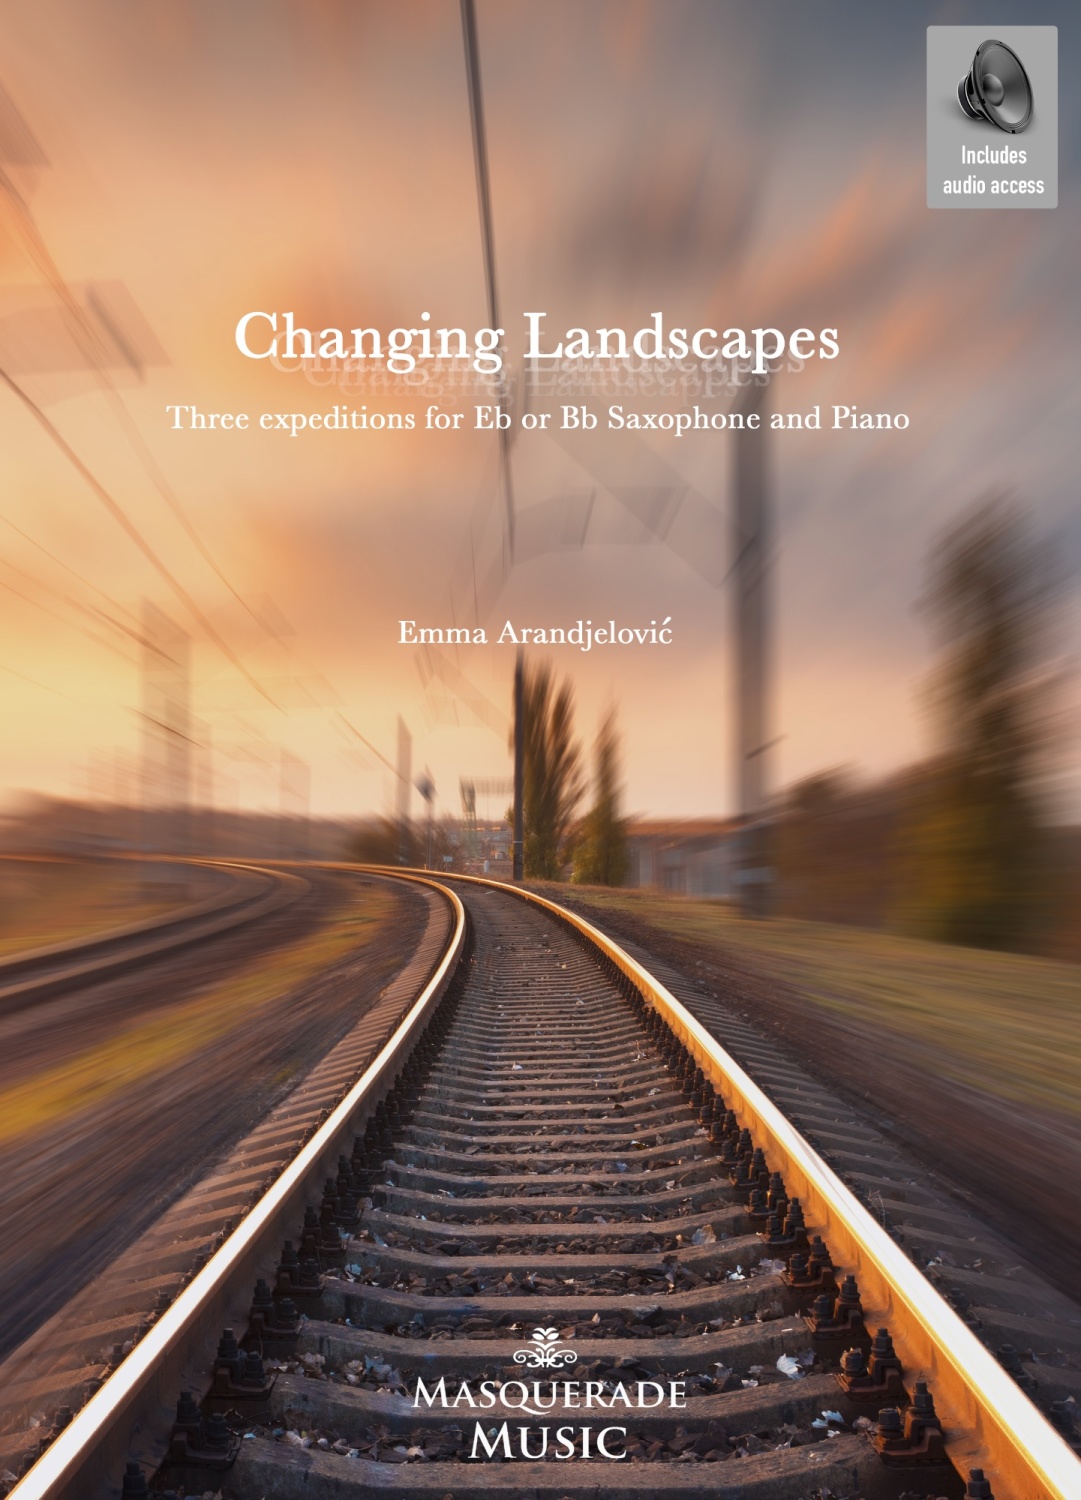 Changing Landscapes Pre-order. Suite for Eb or Bb Saxophone and piano (incl